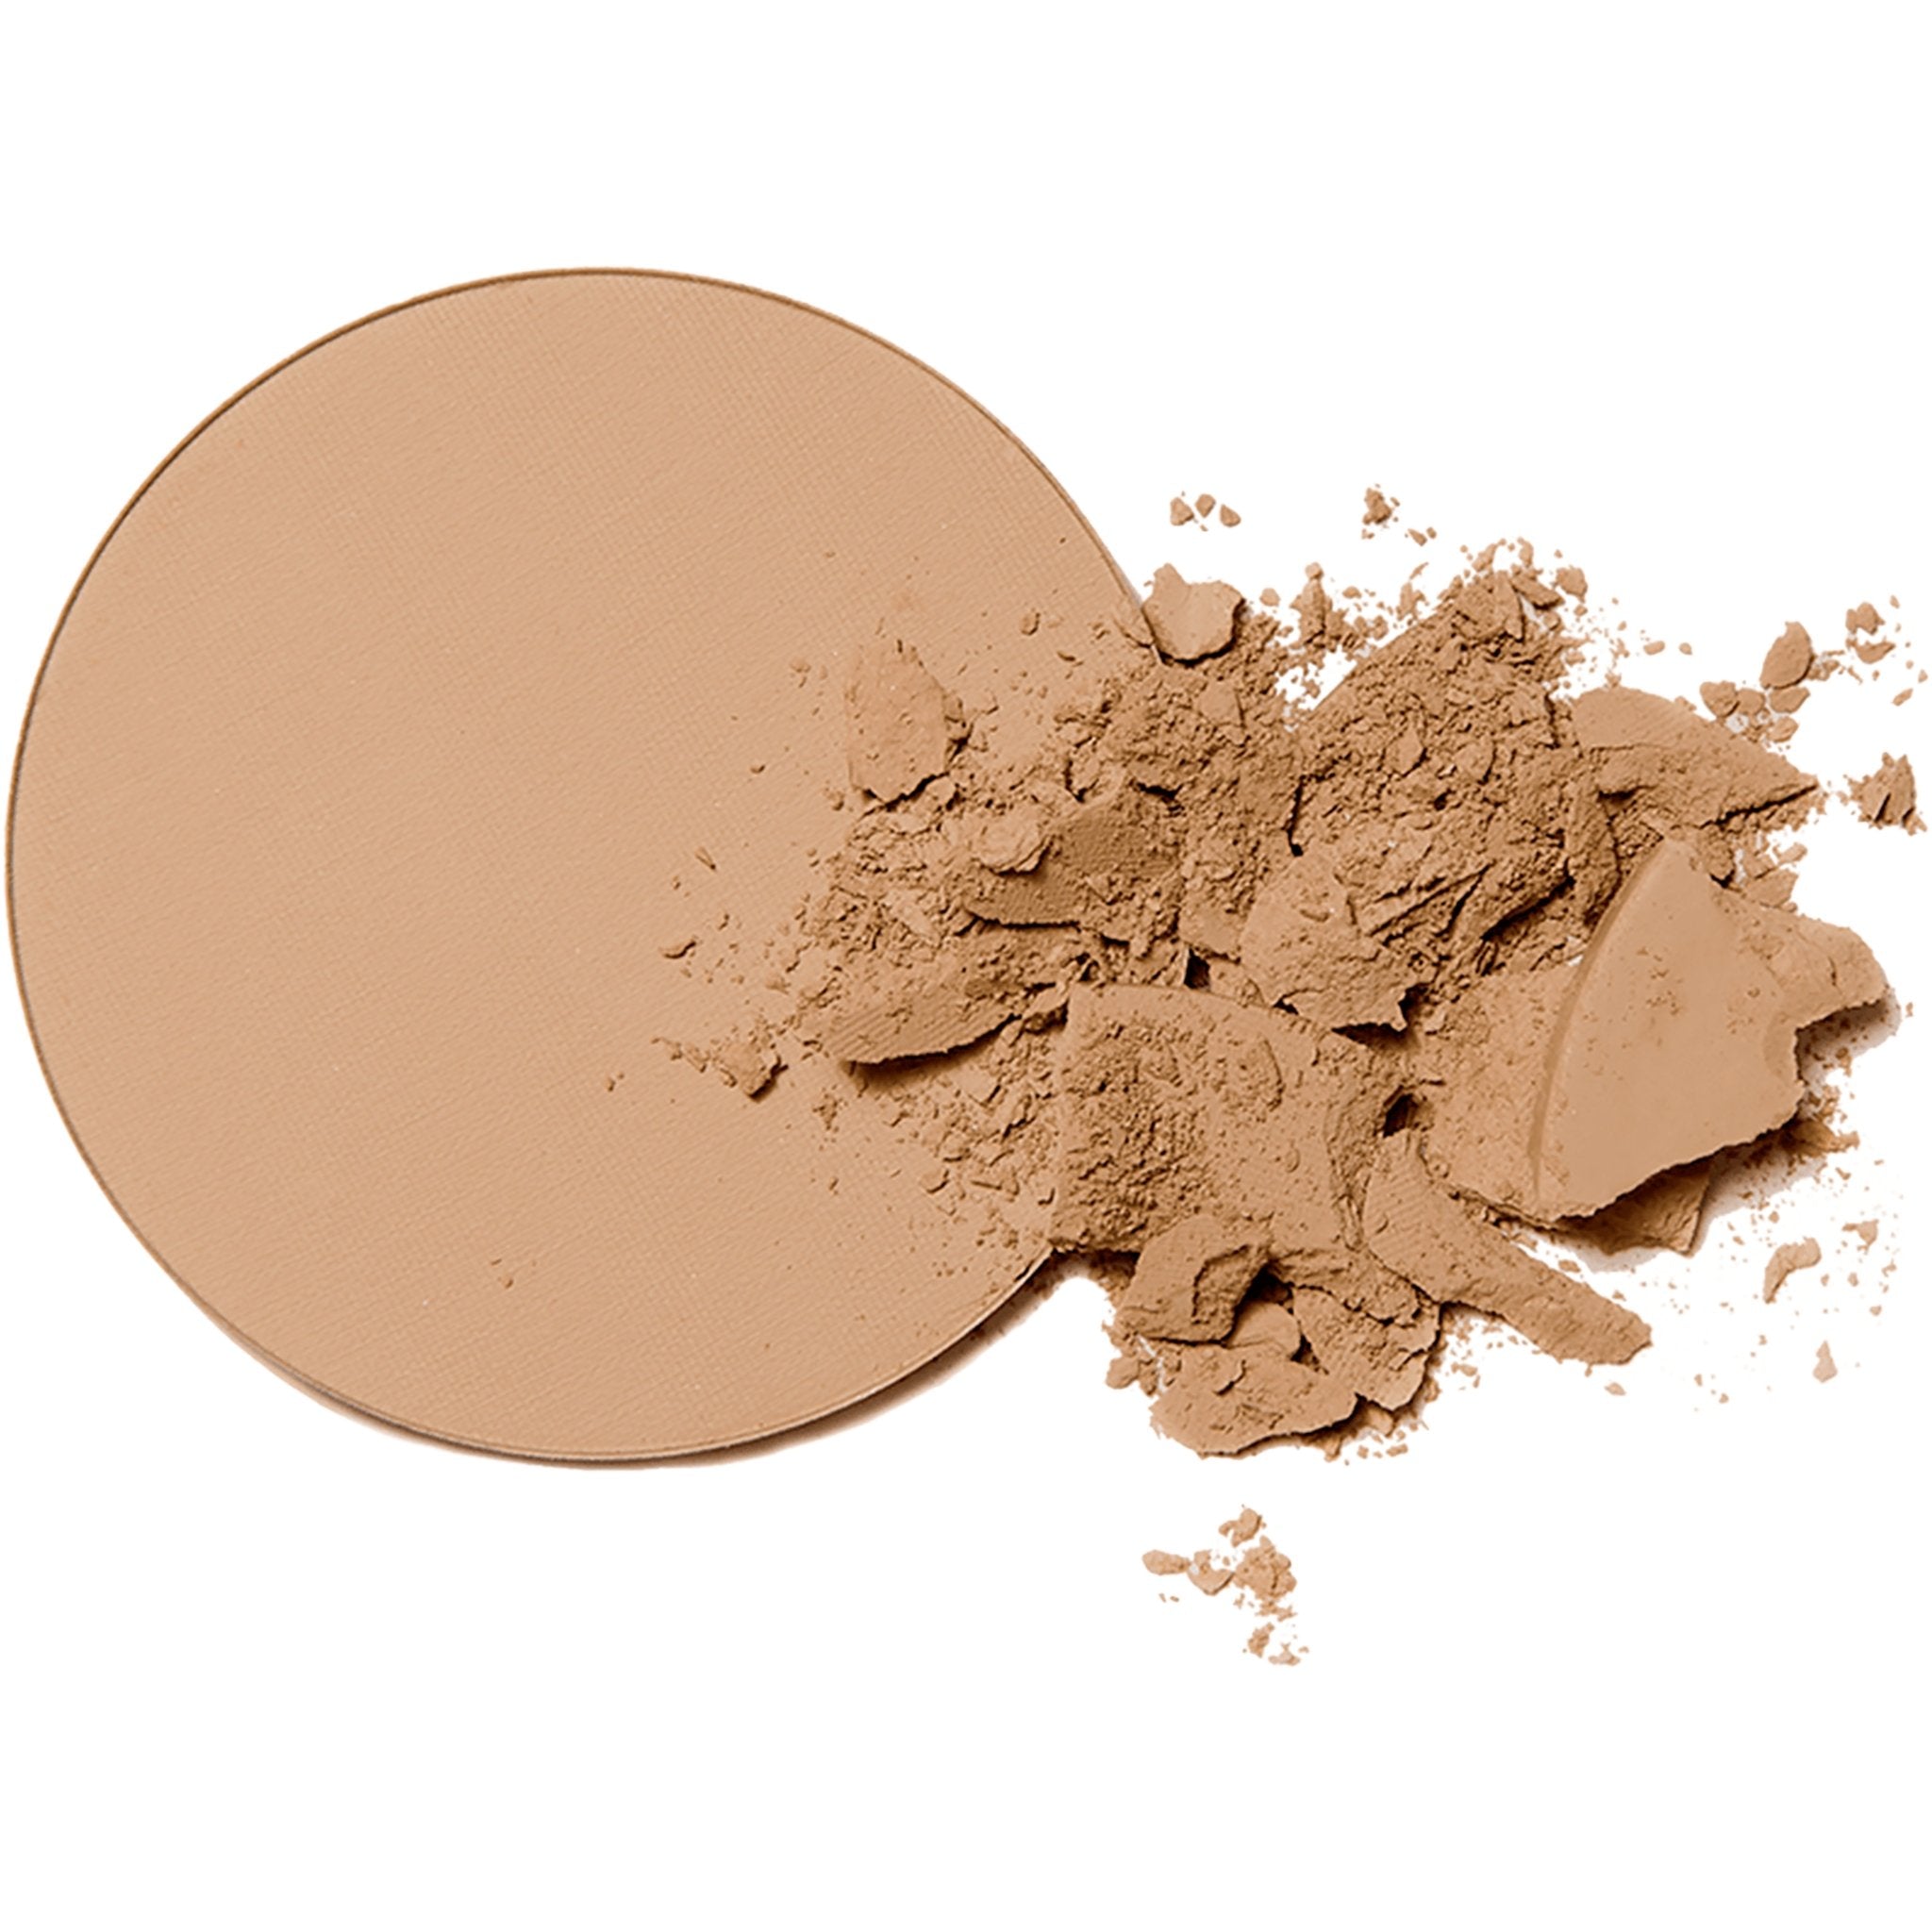 NEW Baked Mineral Foundation - mypure.co.uk